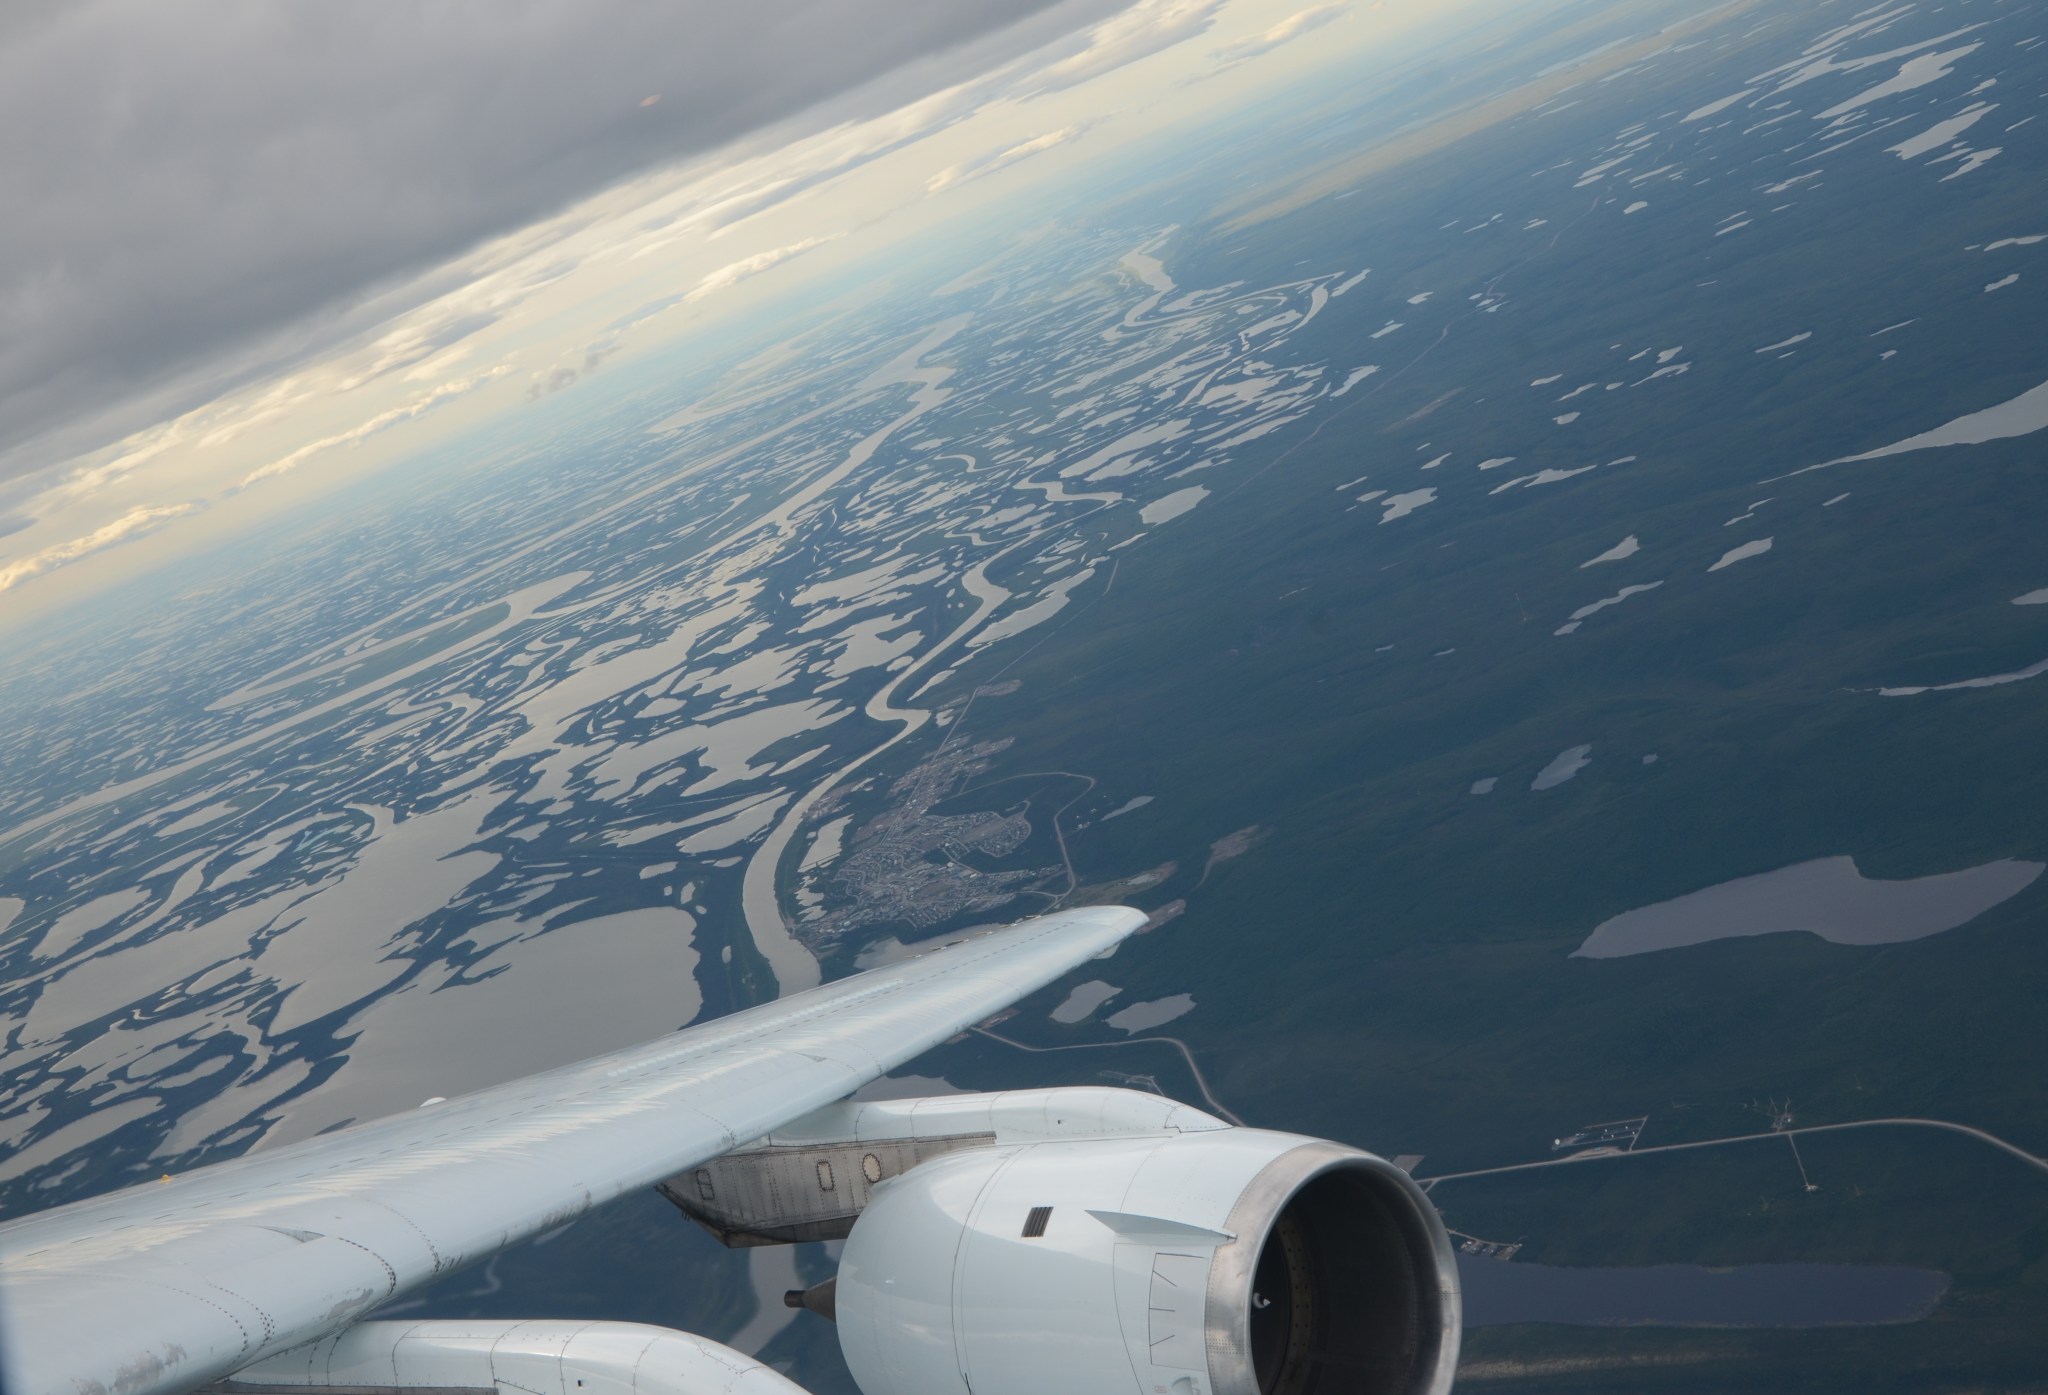 As seen from aboard NASAs DC-8 aircraft: A plane's wing is visible in the lower portion of this photo, which shows an askew view of a sinuous river and surrounding ponds, looking gray as they reflect the light. The surrounding landscape, a deep blue-green